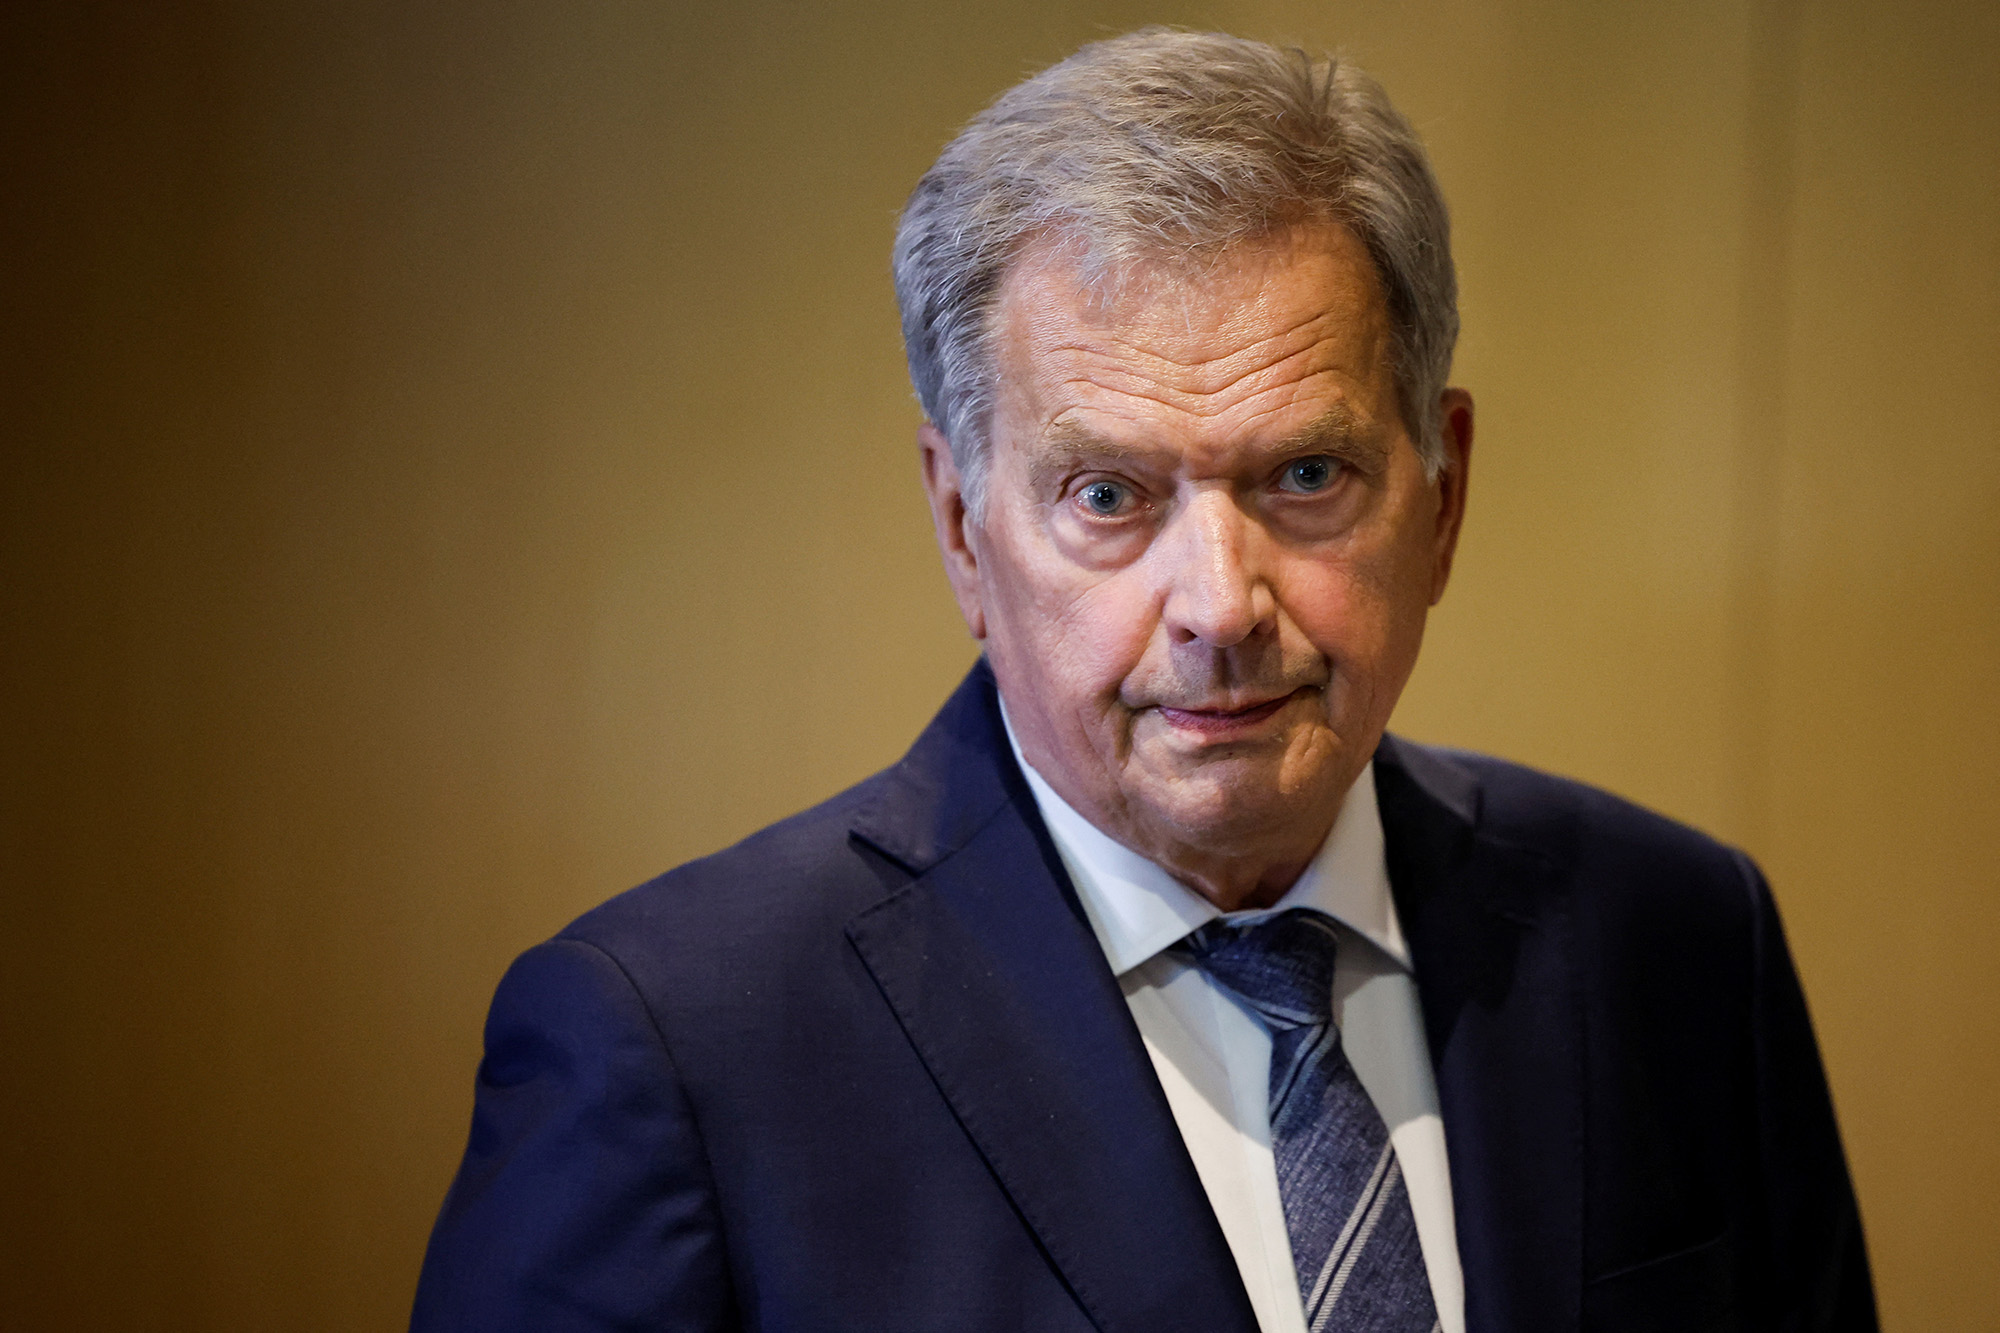 Finland's President Sauli Niinisto attends a briefing ahead of a NATO summit in Madrid, Spain, on June 28.